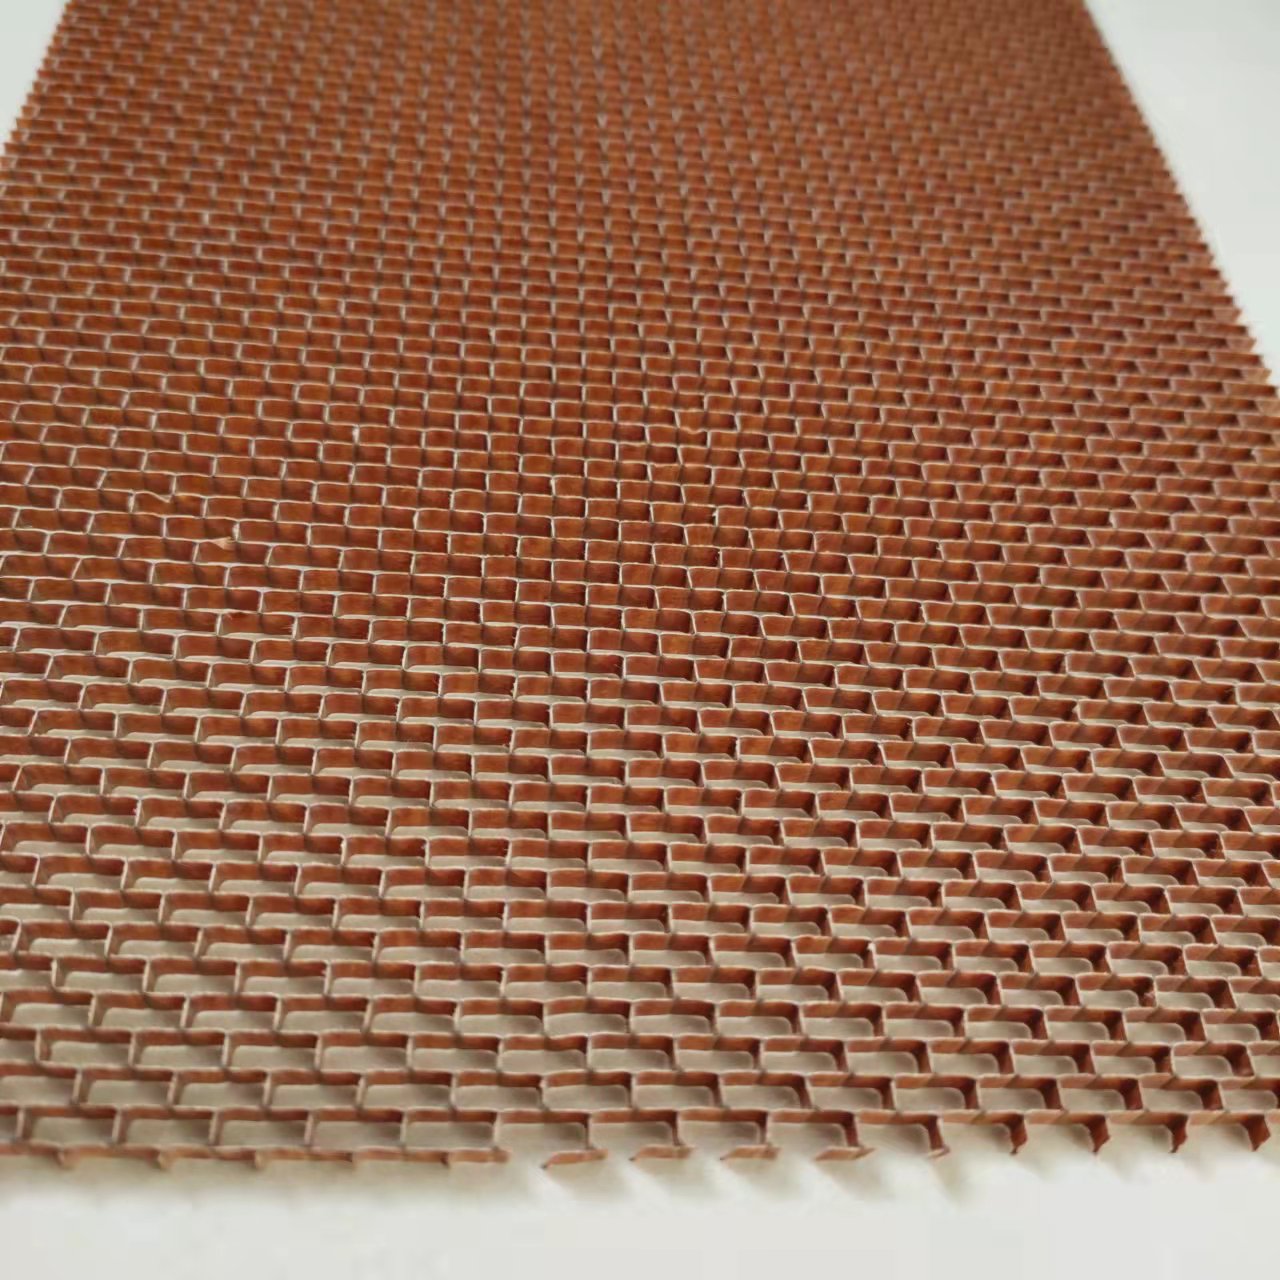 Over Stretched Aramid Honeycomb Core Material For Sandwich Structures